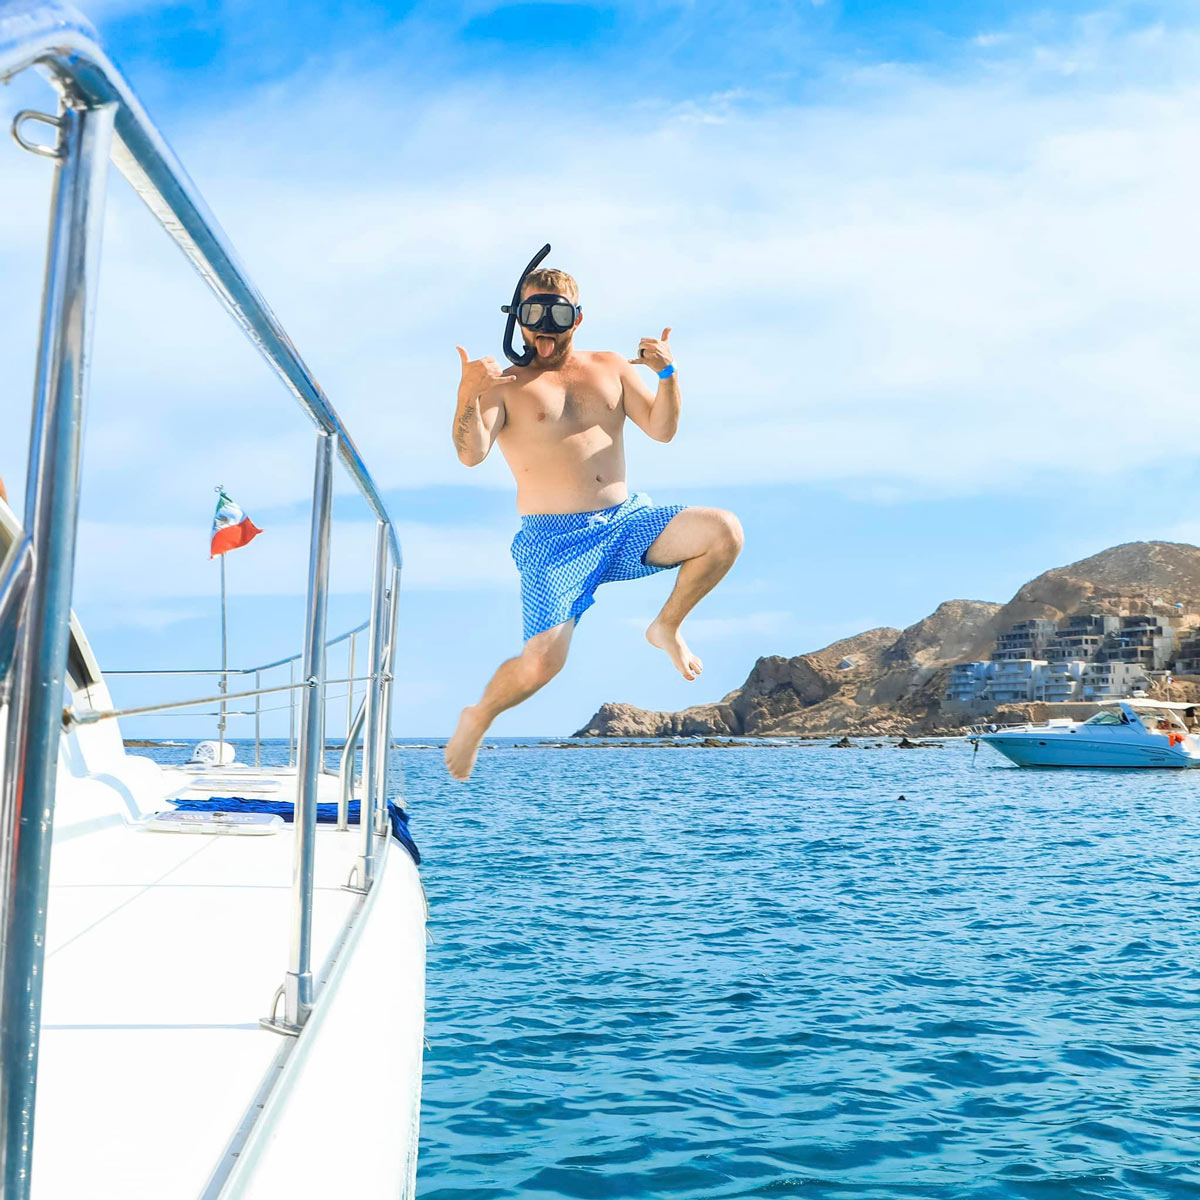 Happy snorkeler jumping off a boat into the water in Cabo San Lucas.